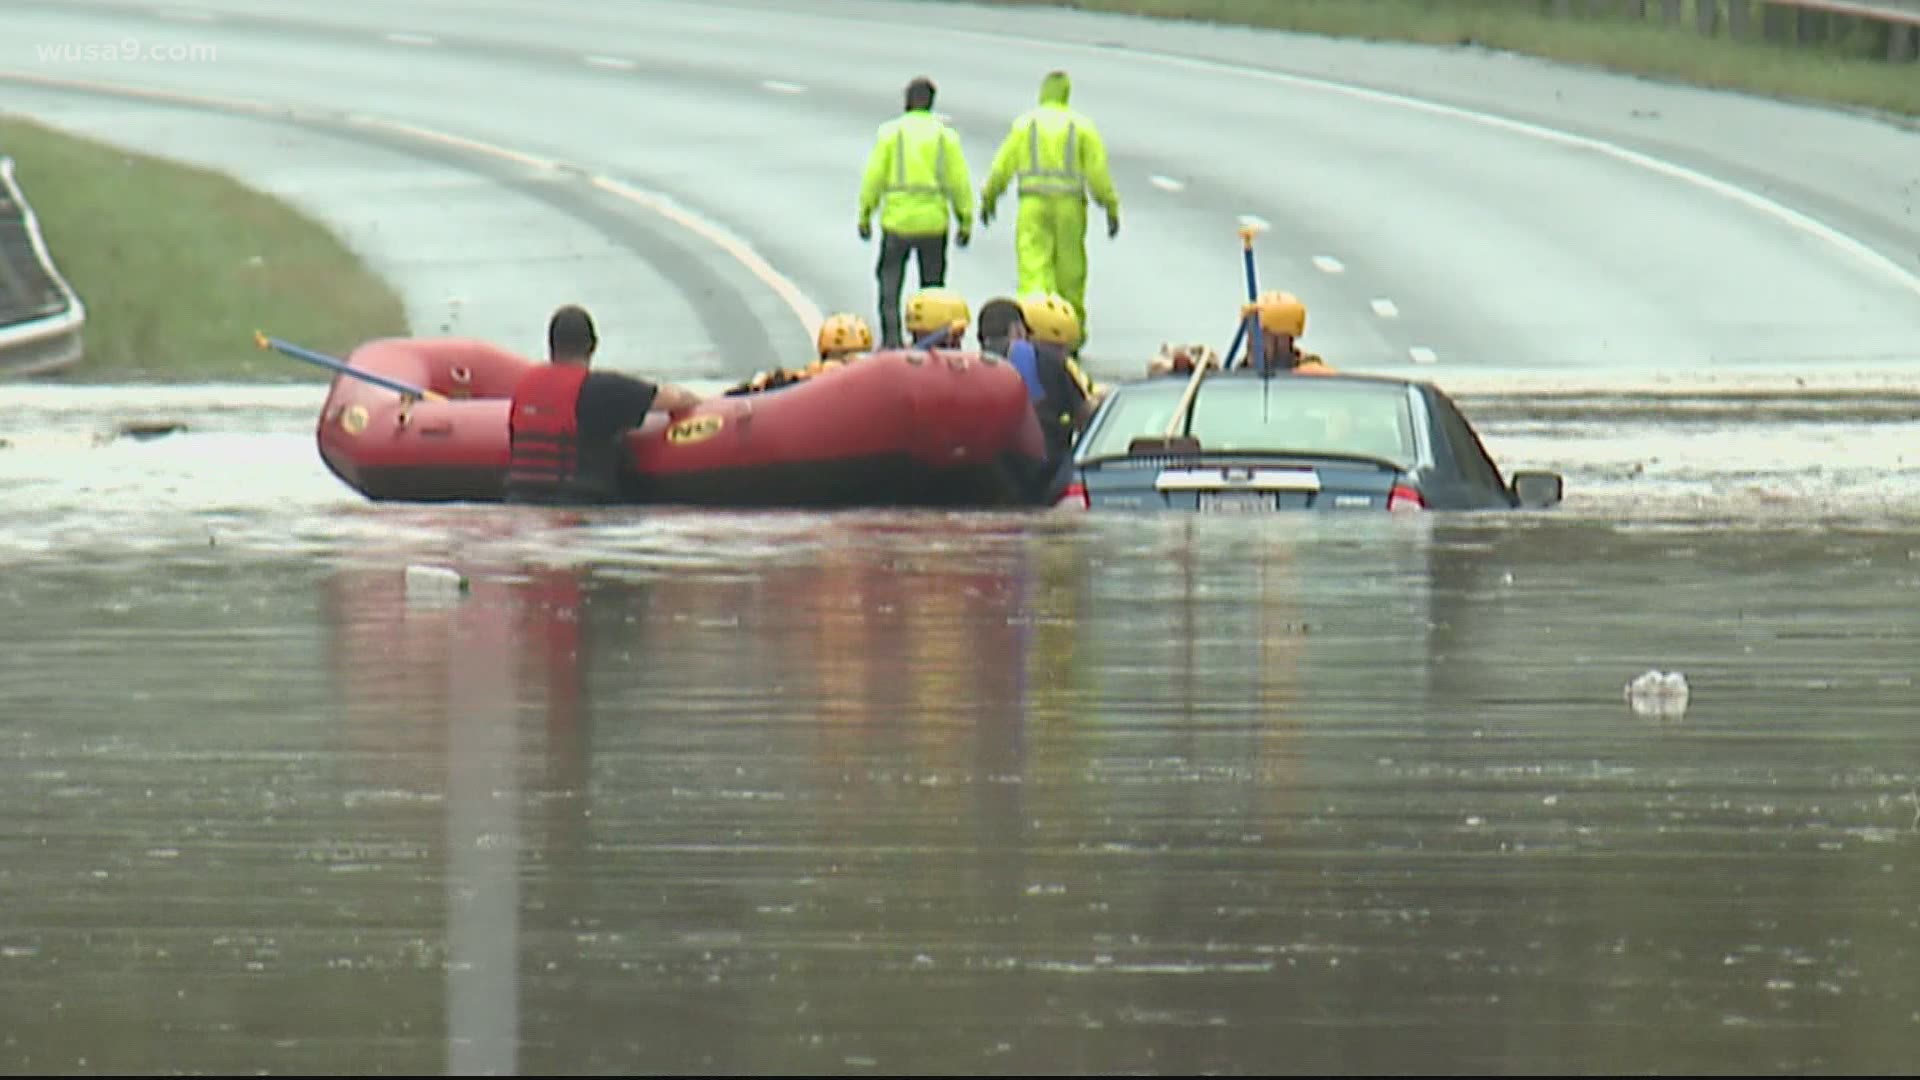 Route-50 was closed in both directions for approximately 4 hours due to flash flooding.